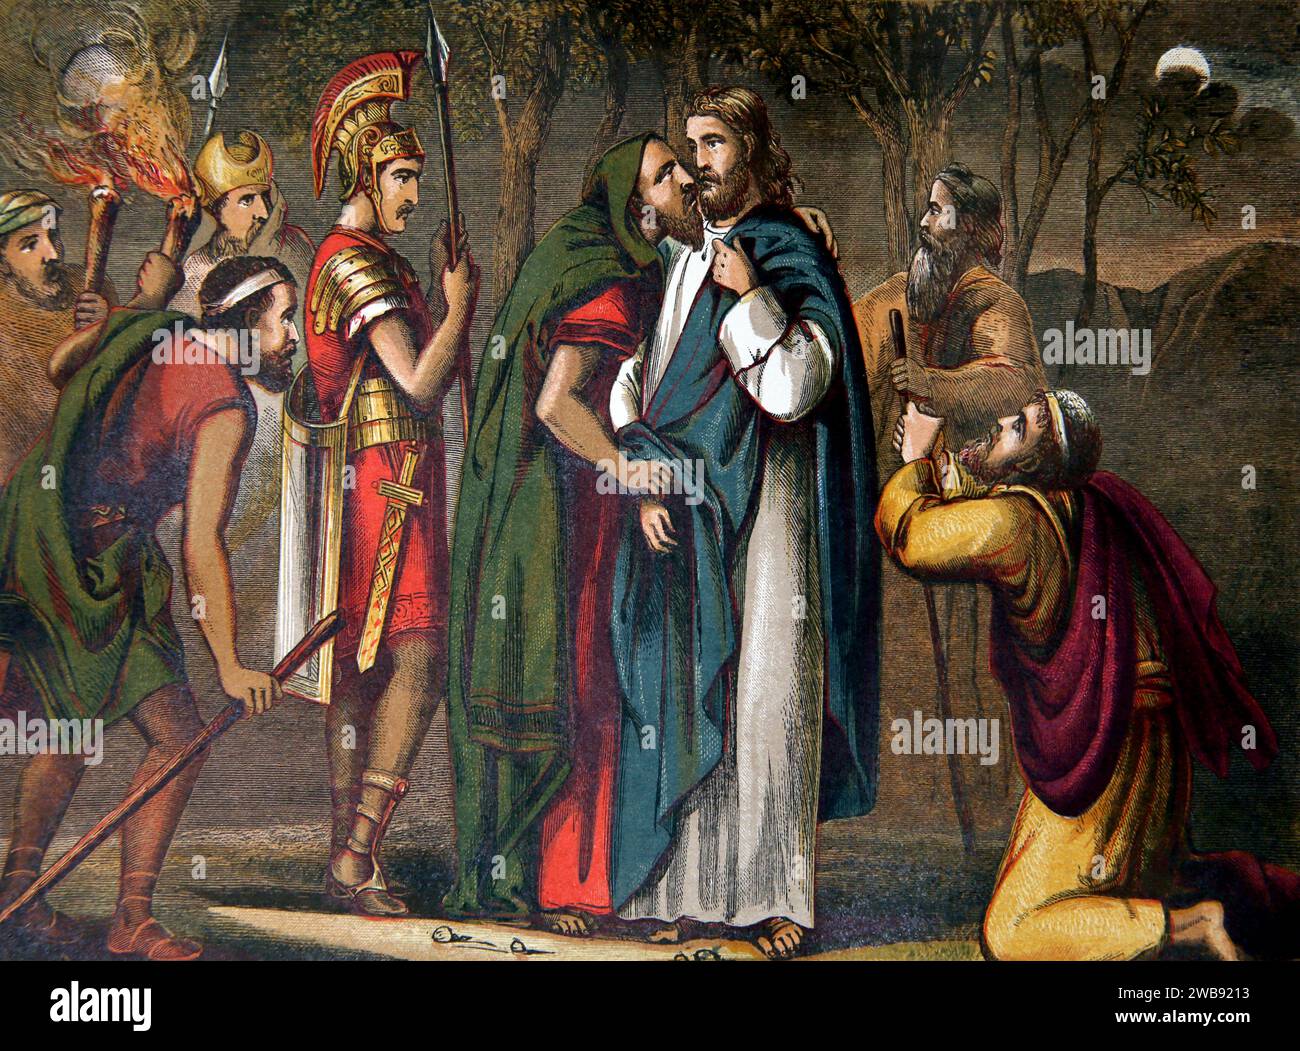 Bible Story Illustration of 'The Judas Kiss' in the Garden of Gethsemane New Testament (Mark) Gospel of Mark from The 19th Century Holy Bible The Alt Stock Photo